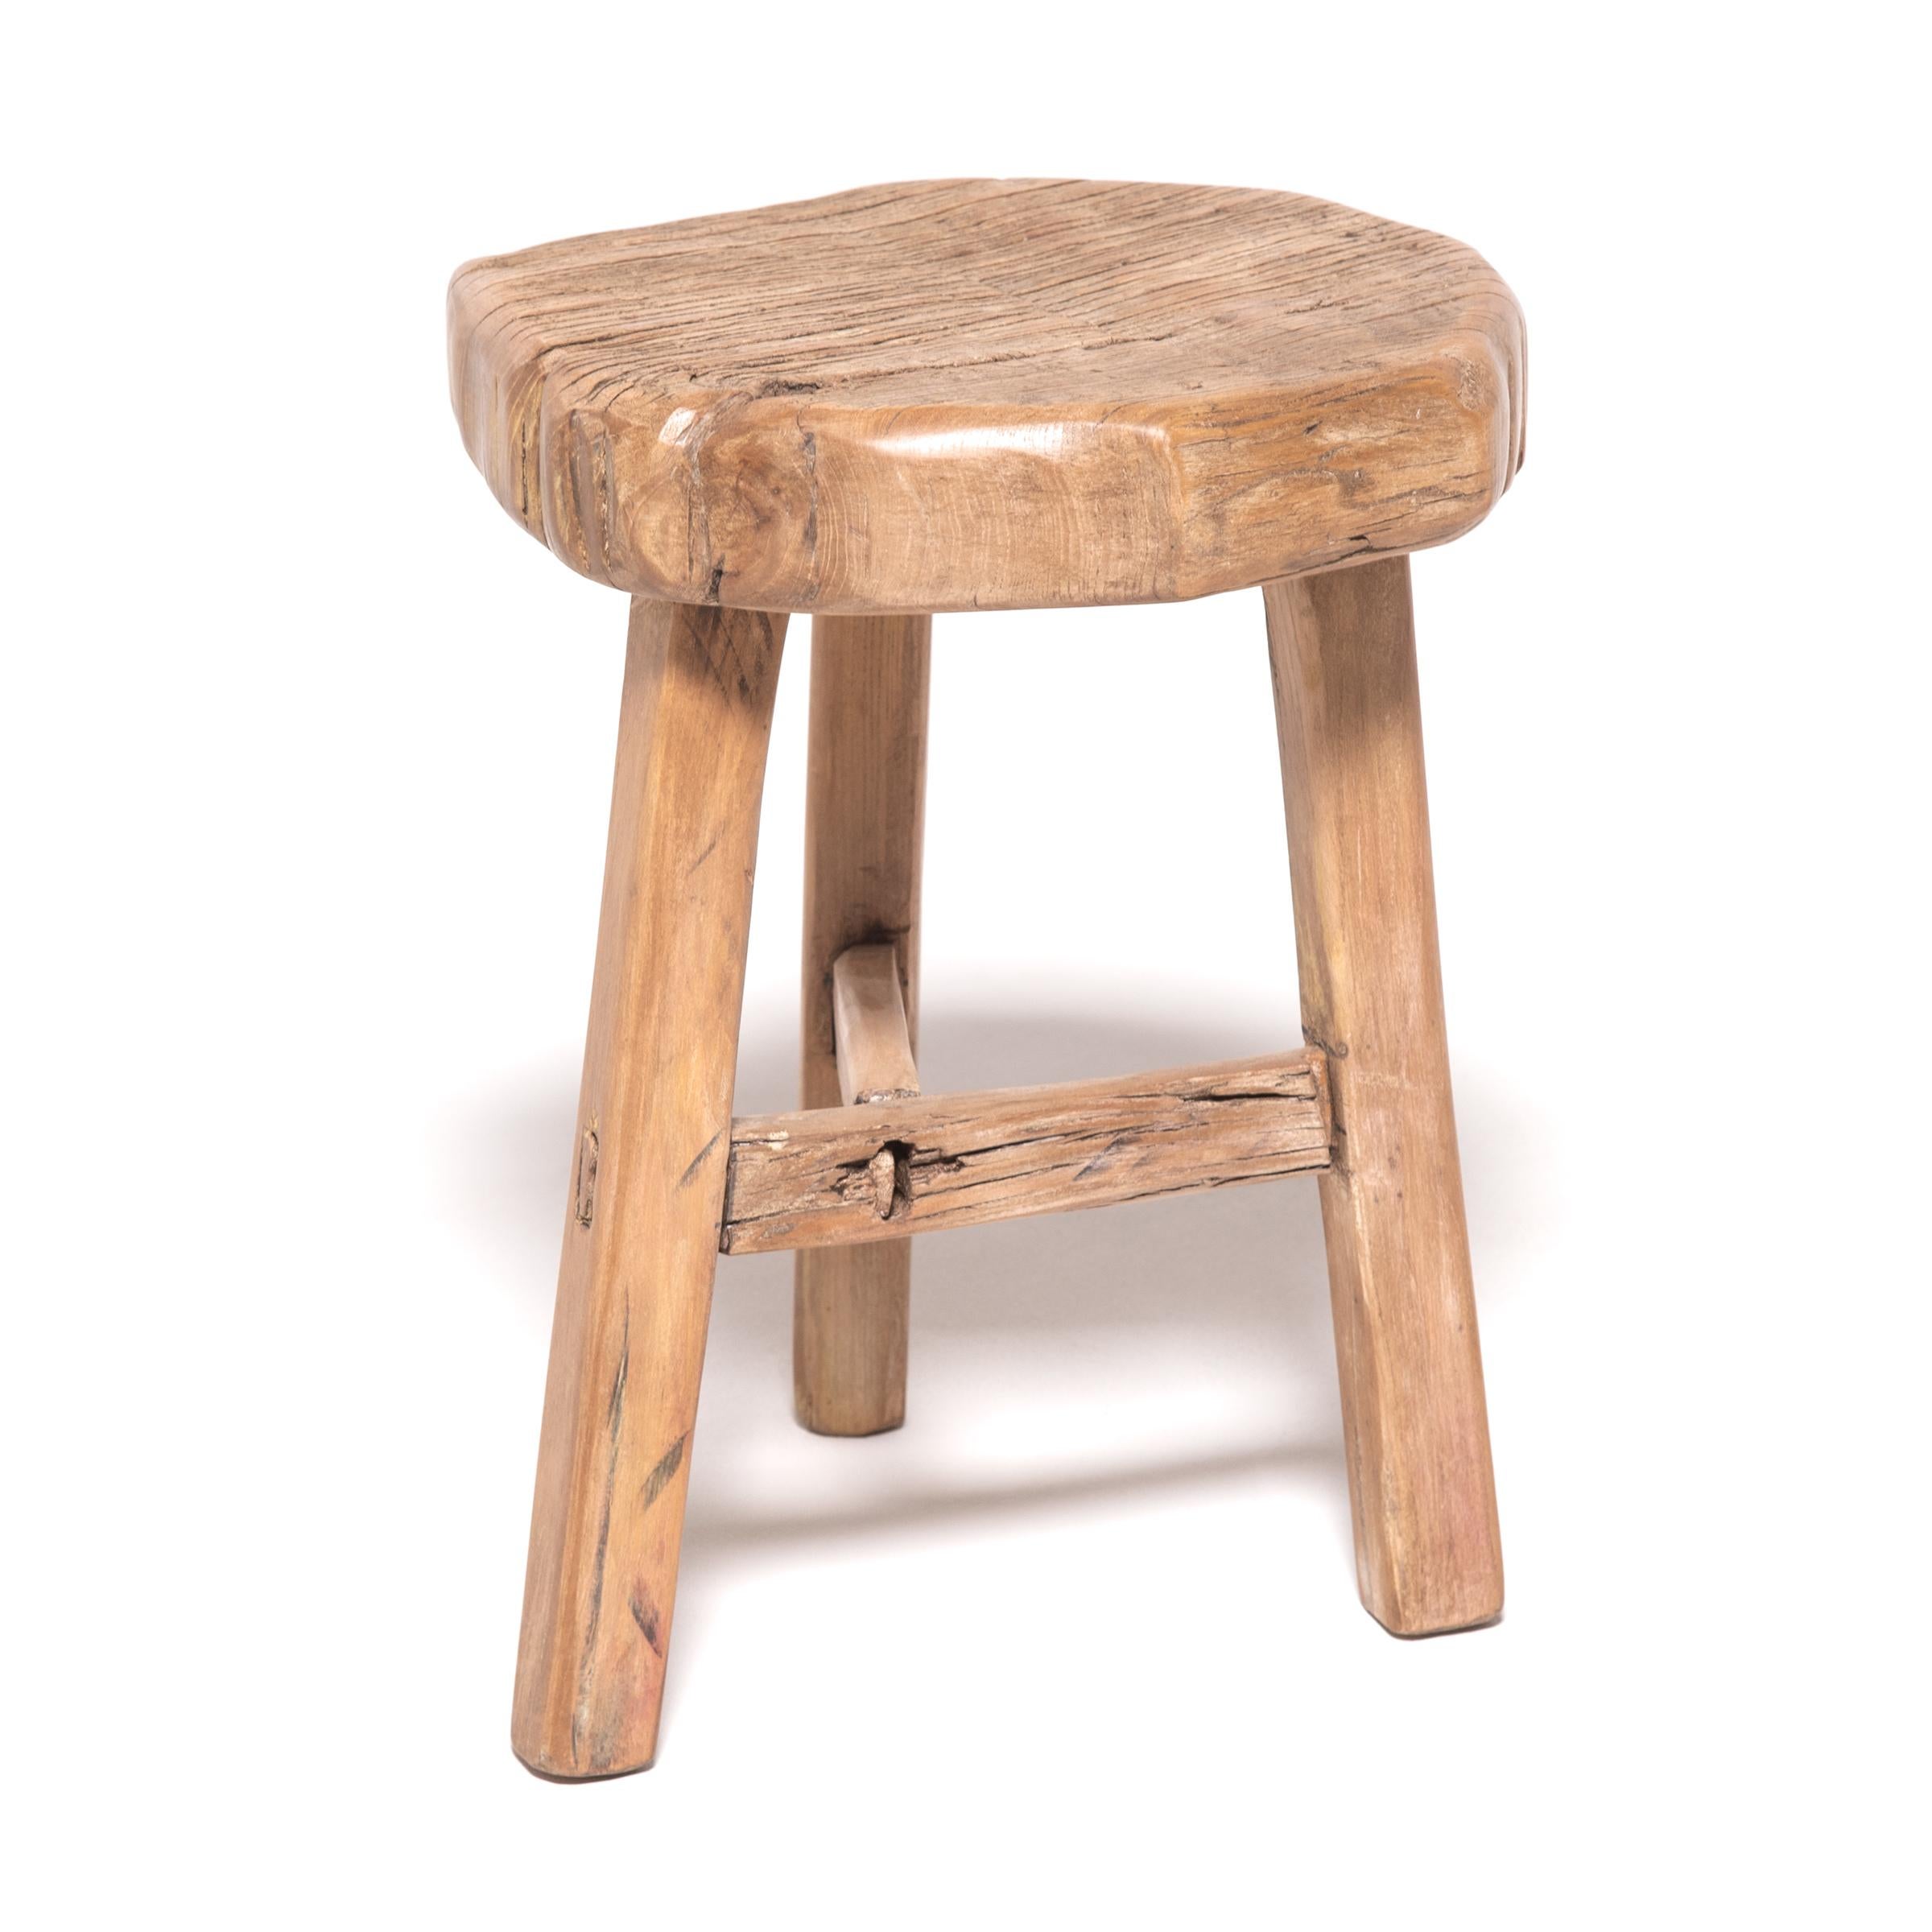 Made of wood reclaimed from 18th century Chinese buildings, this contemporary three-legged stool is the epitome of farmhouse modern. Skilled in traditional joinery techniques, our craftspeople fashioned a simple, portable stool, much like those that